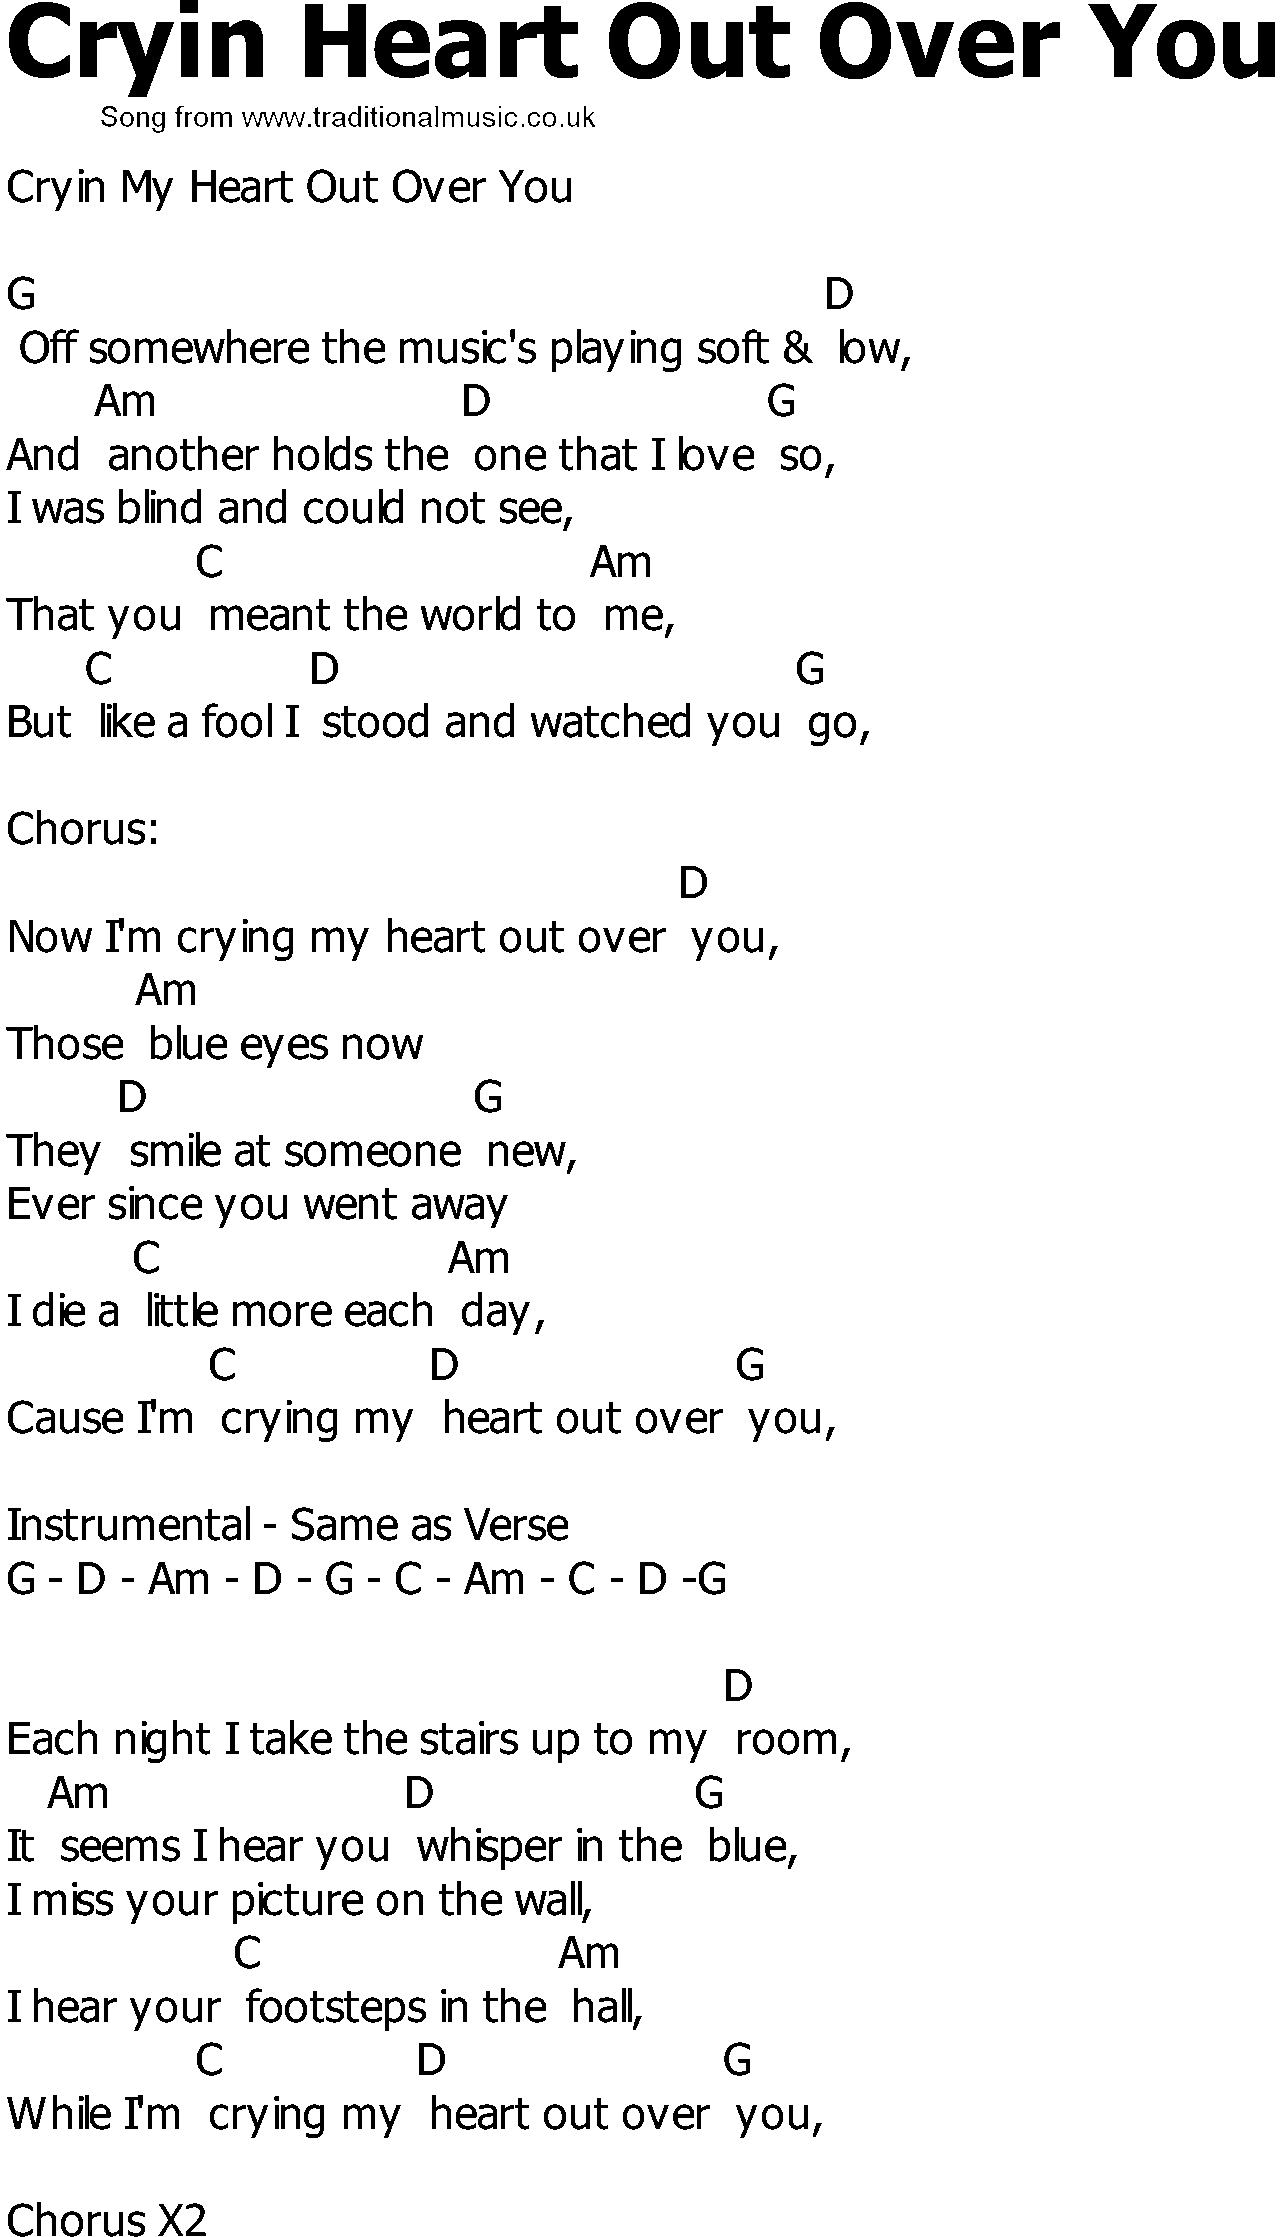 Old Country song lyrics with chords - Cryin Heart Out Over You